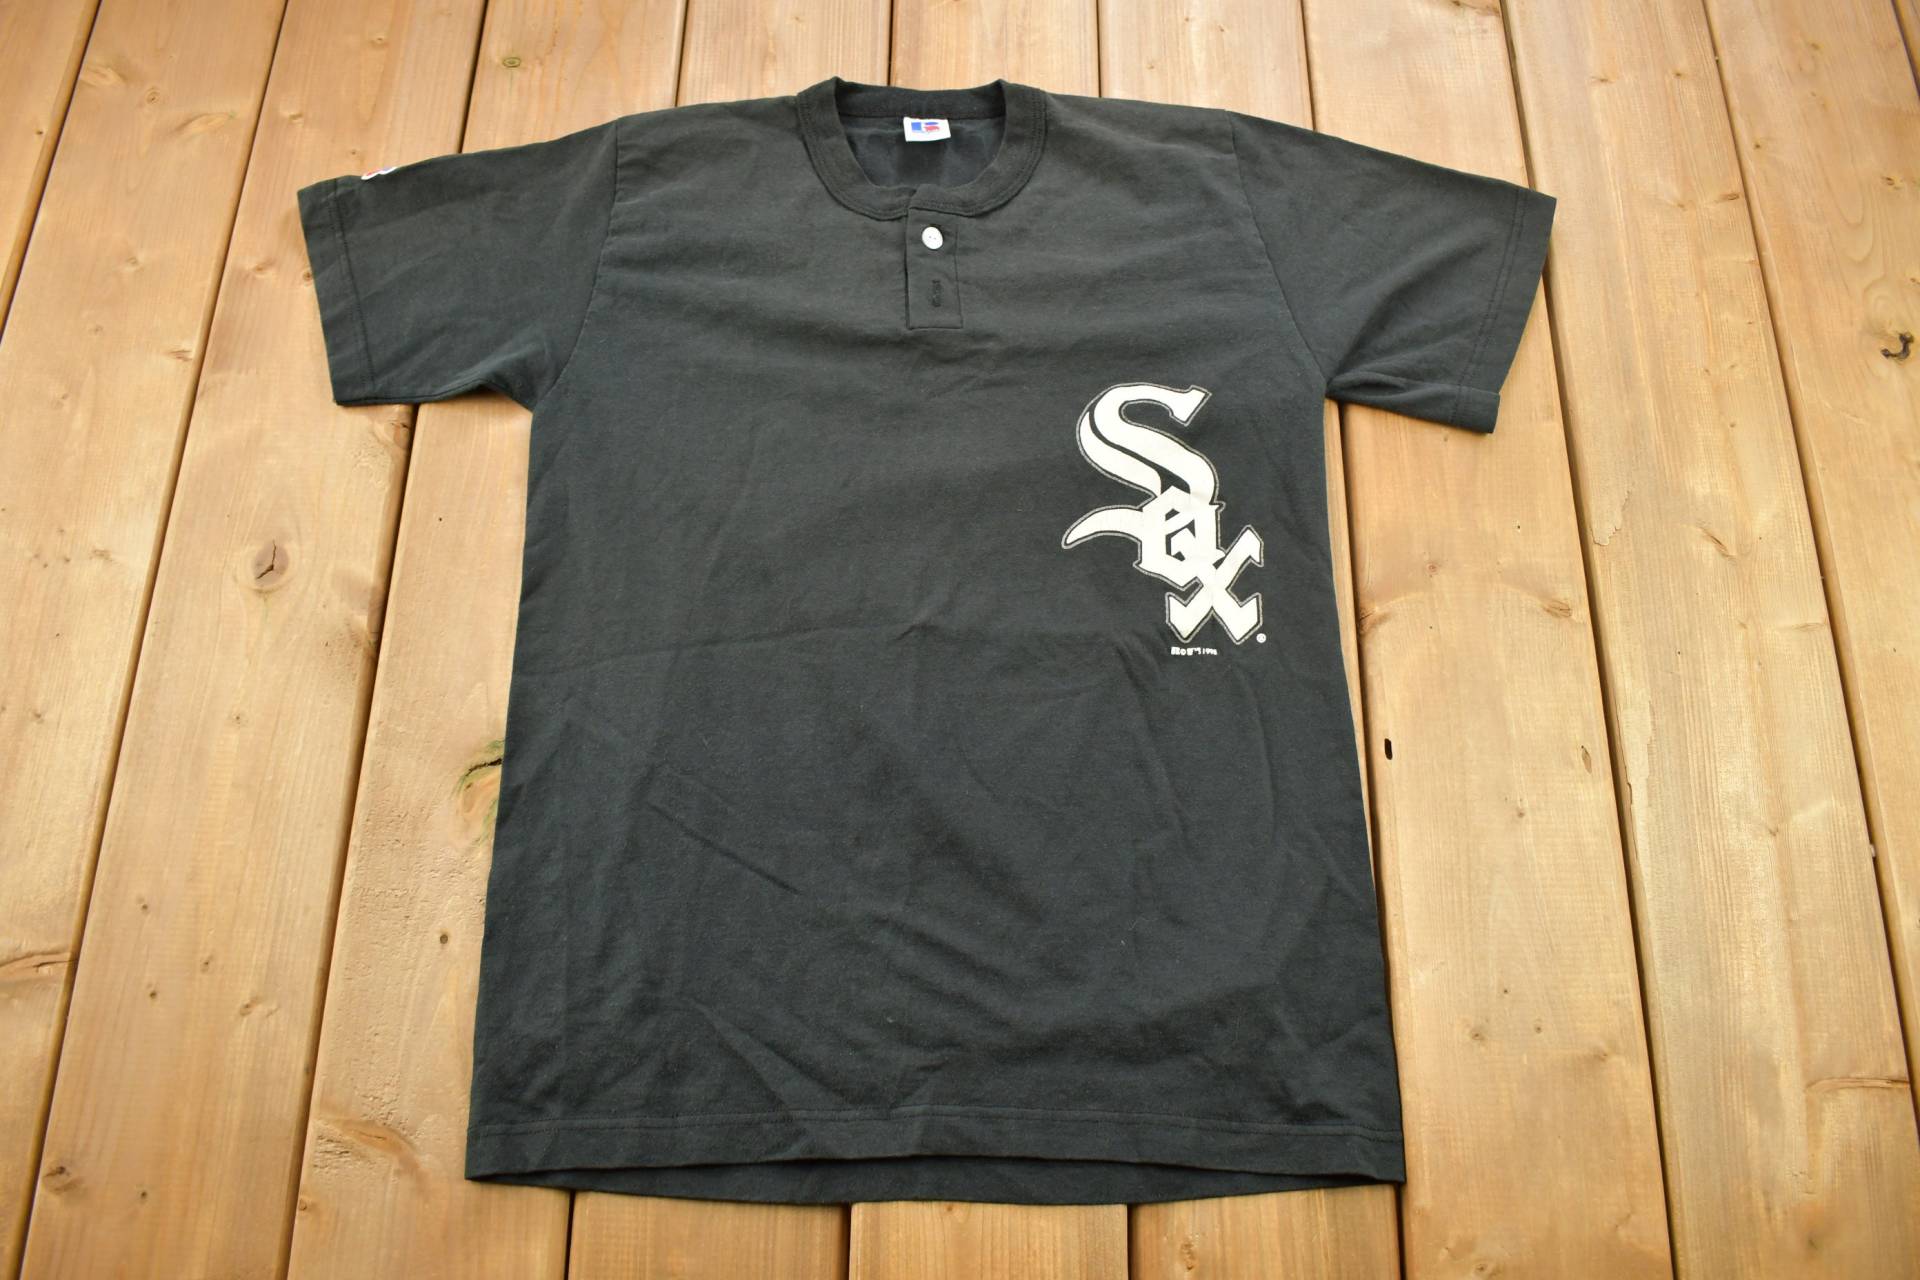 Vintage 1998 Chicago White Sox Mlb Russell Athletics Henley T-Shirt/Made in Usa Parisi Lou Gehrig Jugend Baseball von Lostboysvintage